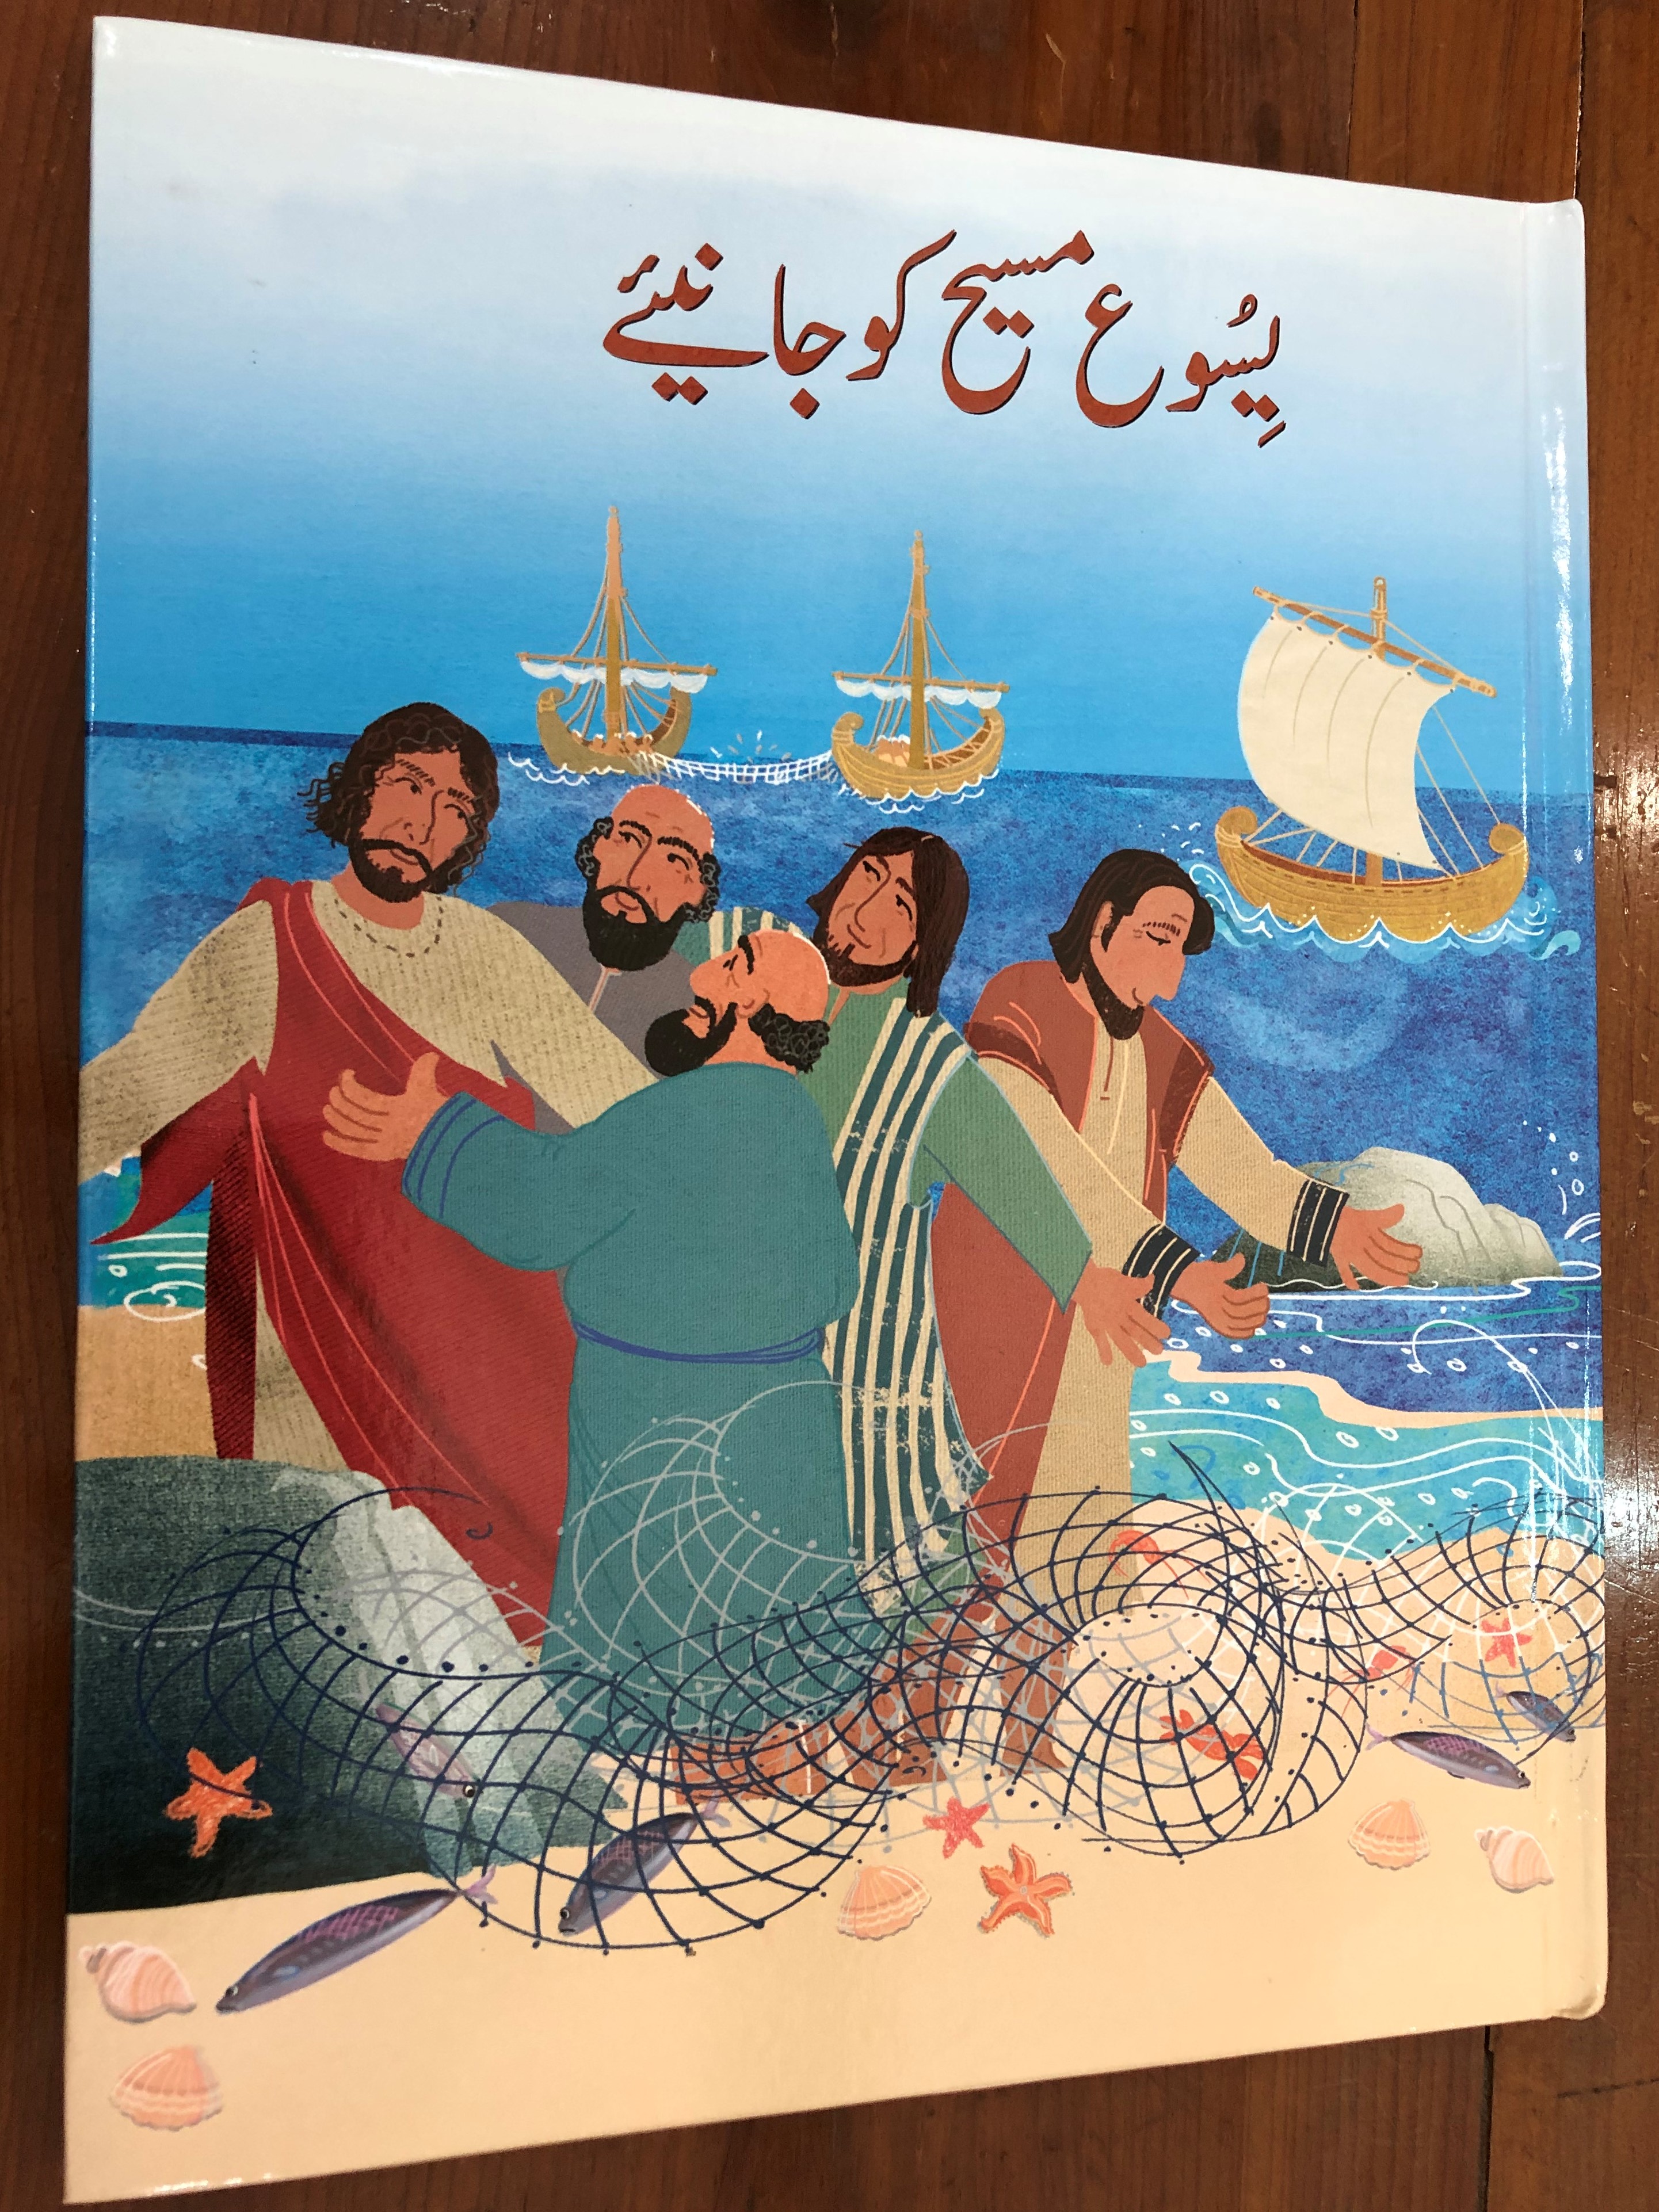 who-is-jesus-by-christina-goodings-urdu-edition-illustrated-by-maria-royse-pakistan-bible-society-catholic-bible-commission-first-edition-2017-1-.jpg